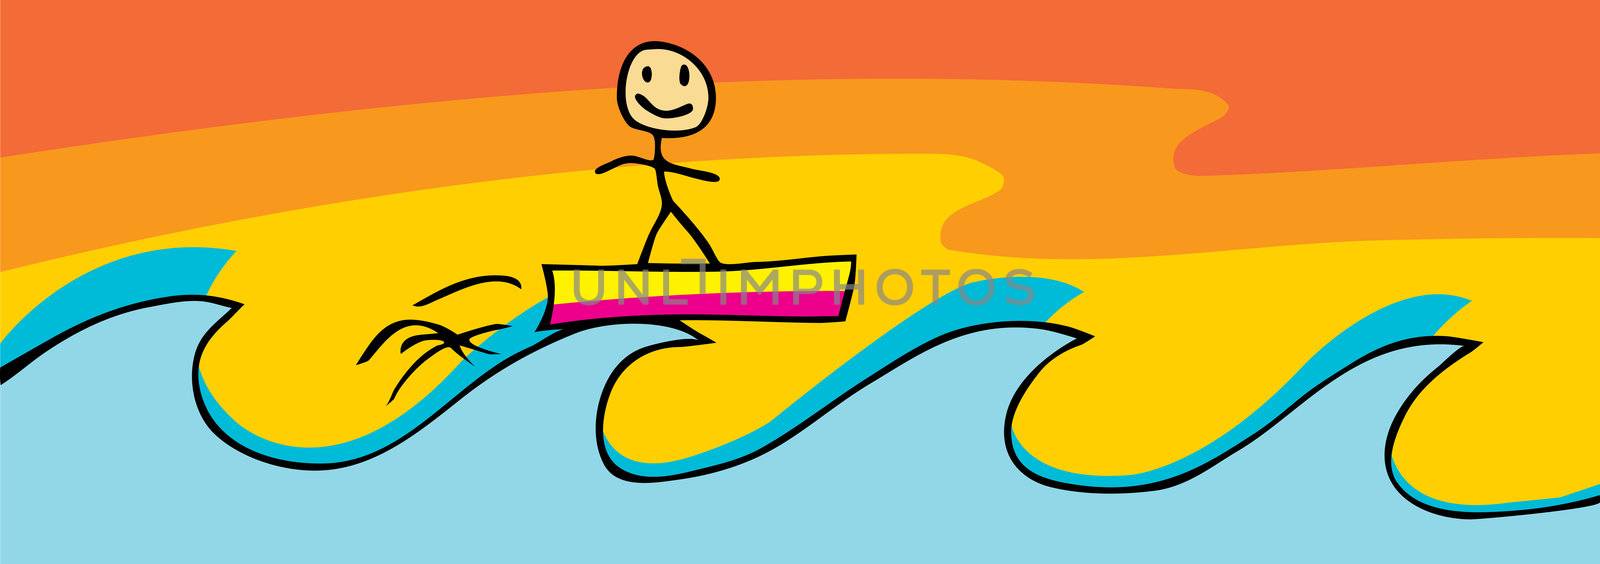 Smiling stick figure on surfboard over high waves